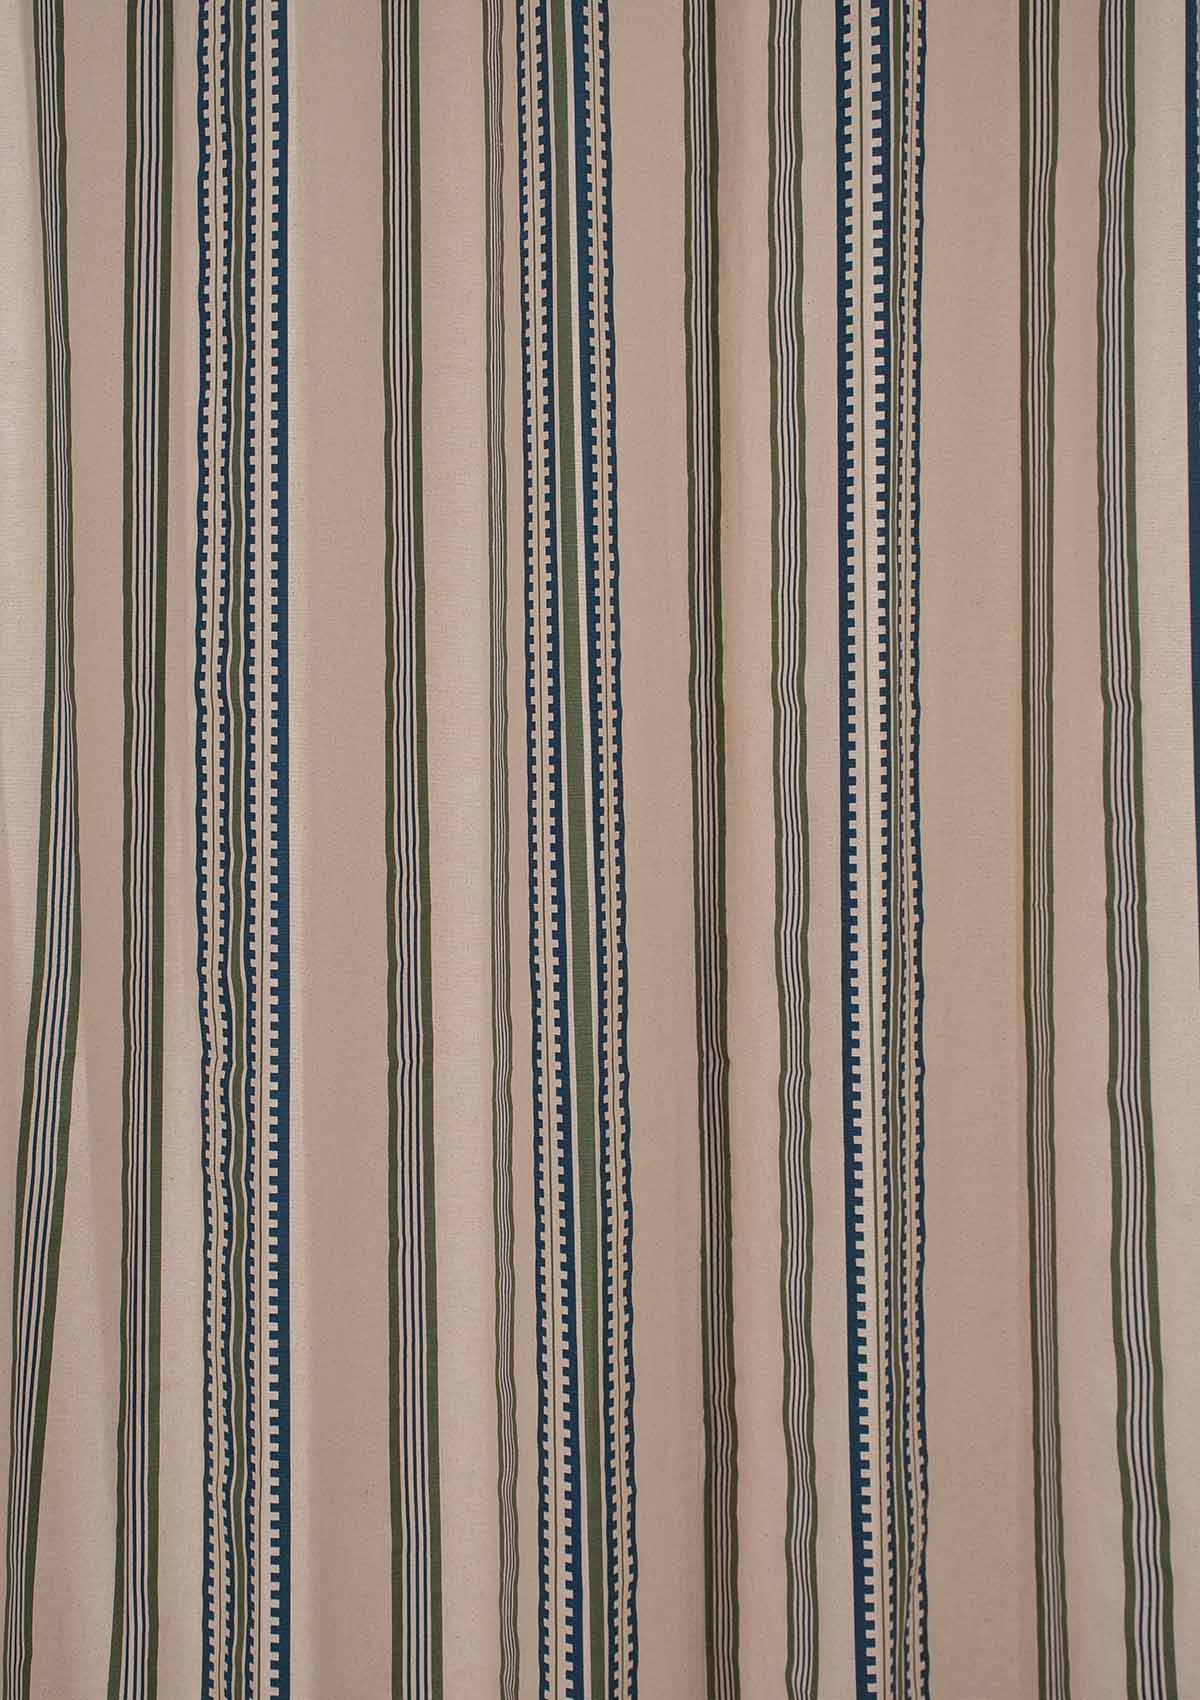 Roman Stripes 100% cotton geometric curtain for bed room - Room darkening - Pepper Green and Night Blue - Pack of 1